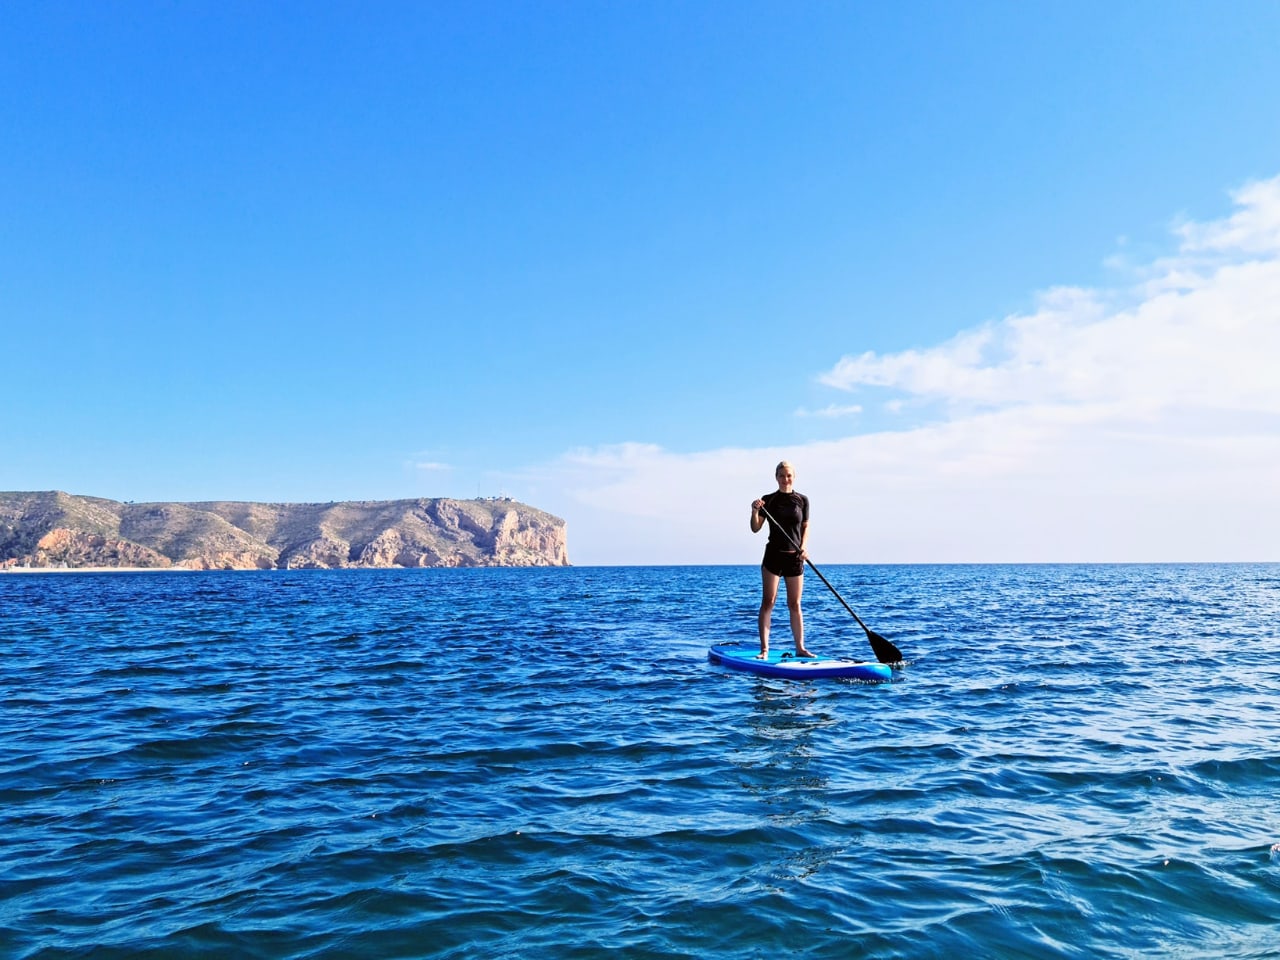 surf lessons chania crete, surfing lessons chania crete, sup lessons chania crete, best surfing club chania, where to surf chania crete, where to sup chania crete, best surf instructor chania crete